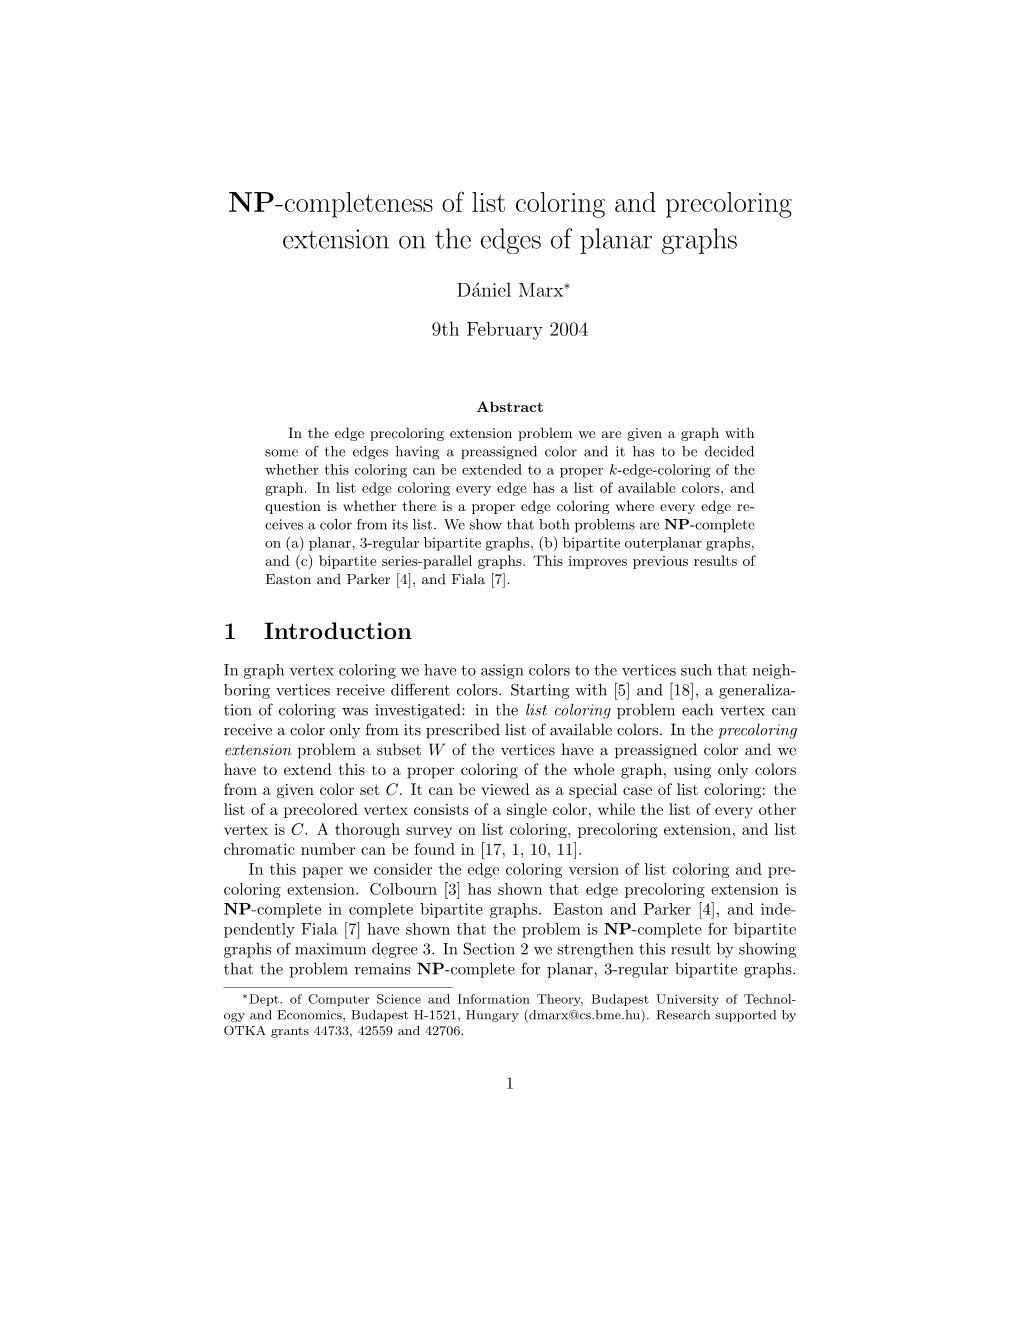 NP-Completeness of List Coloring and Precoloring Extension on the Edges of Planar Graphs